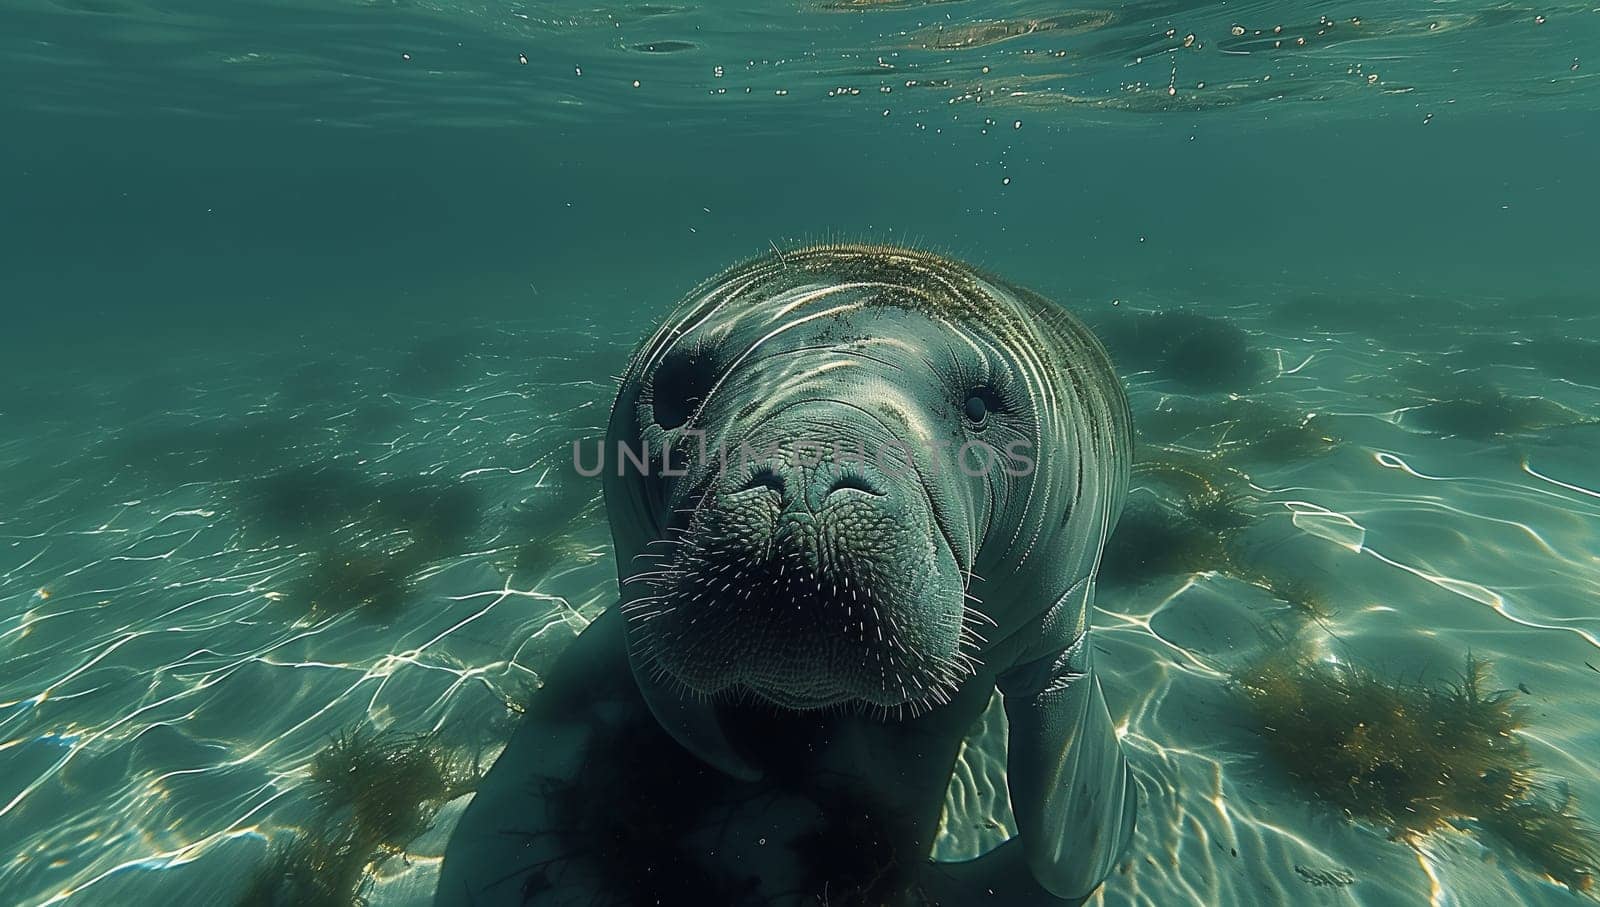 A marine mammal, the manatee, a carnivore, is swimming underwater, showcasing its electric blue hue. Marine biology and wildlife science observe its snout as it looks at the camera